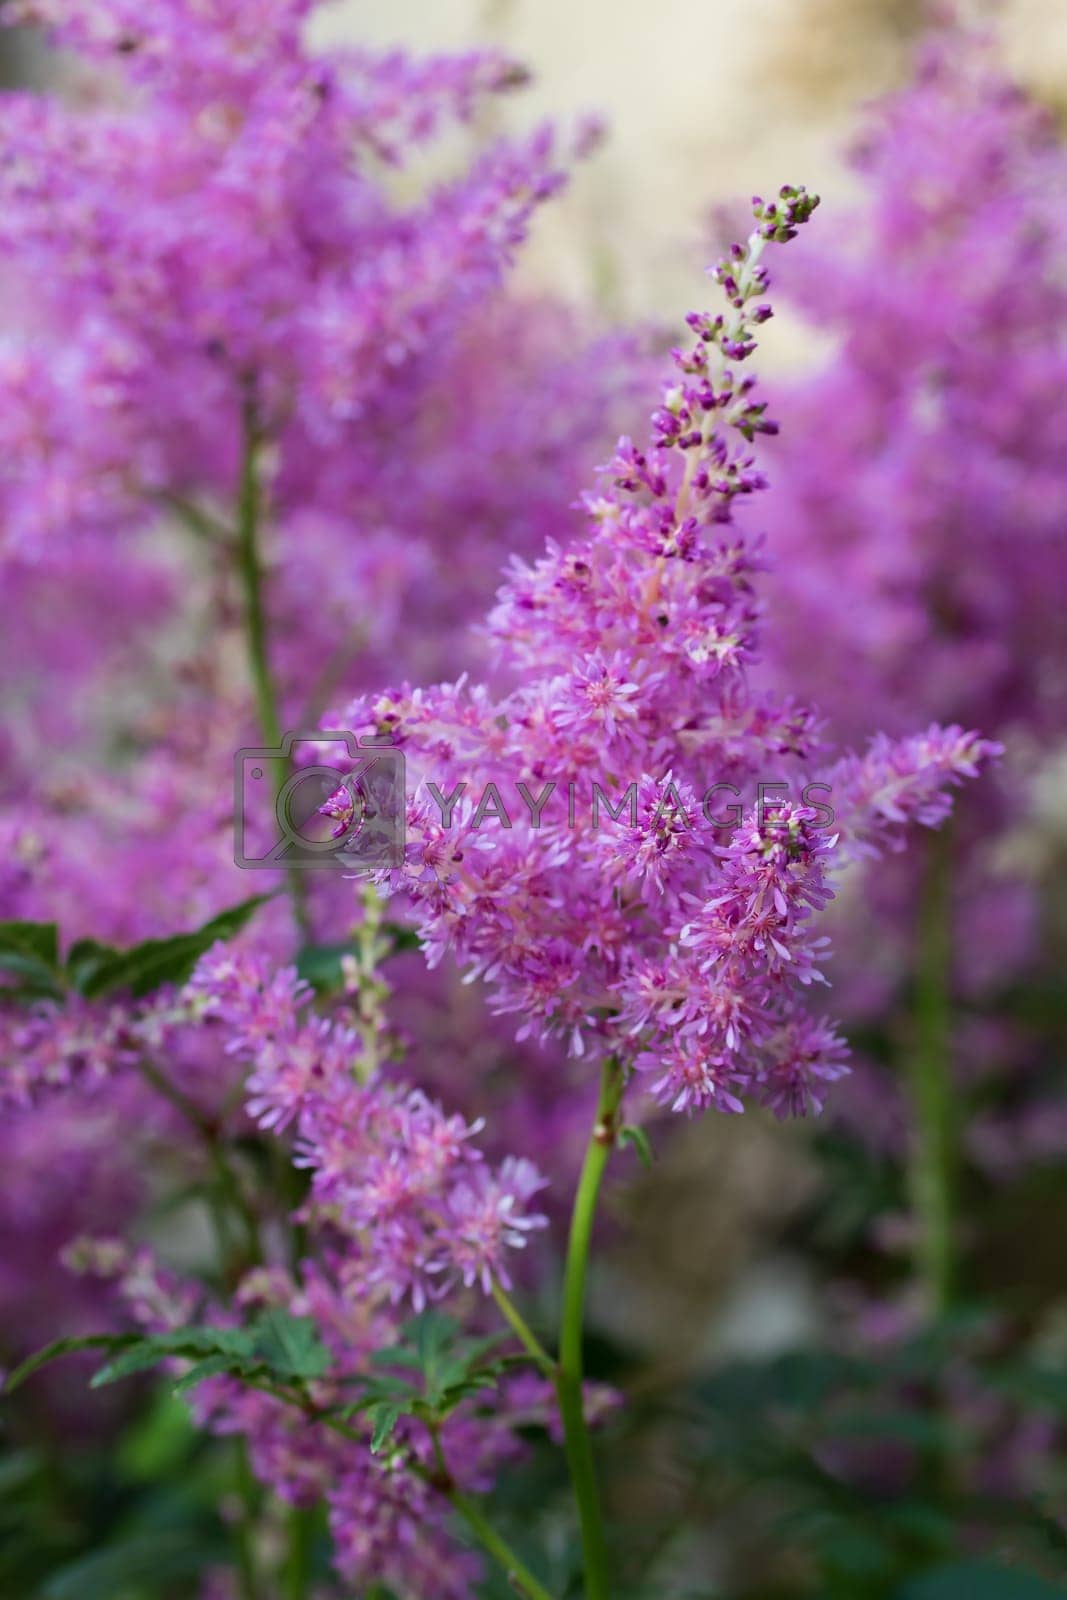 Royalty free image of Blooming pink astilbes in a flower bed in the garden, close-up by galsand